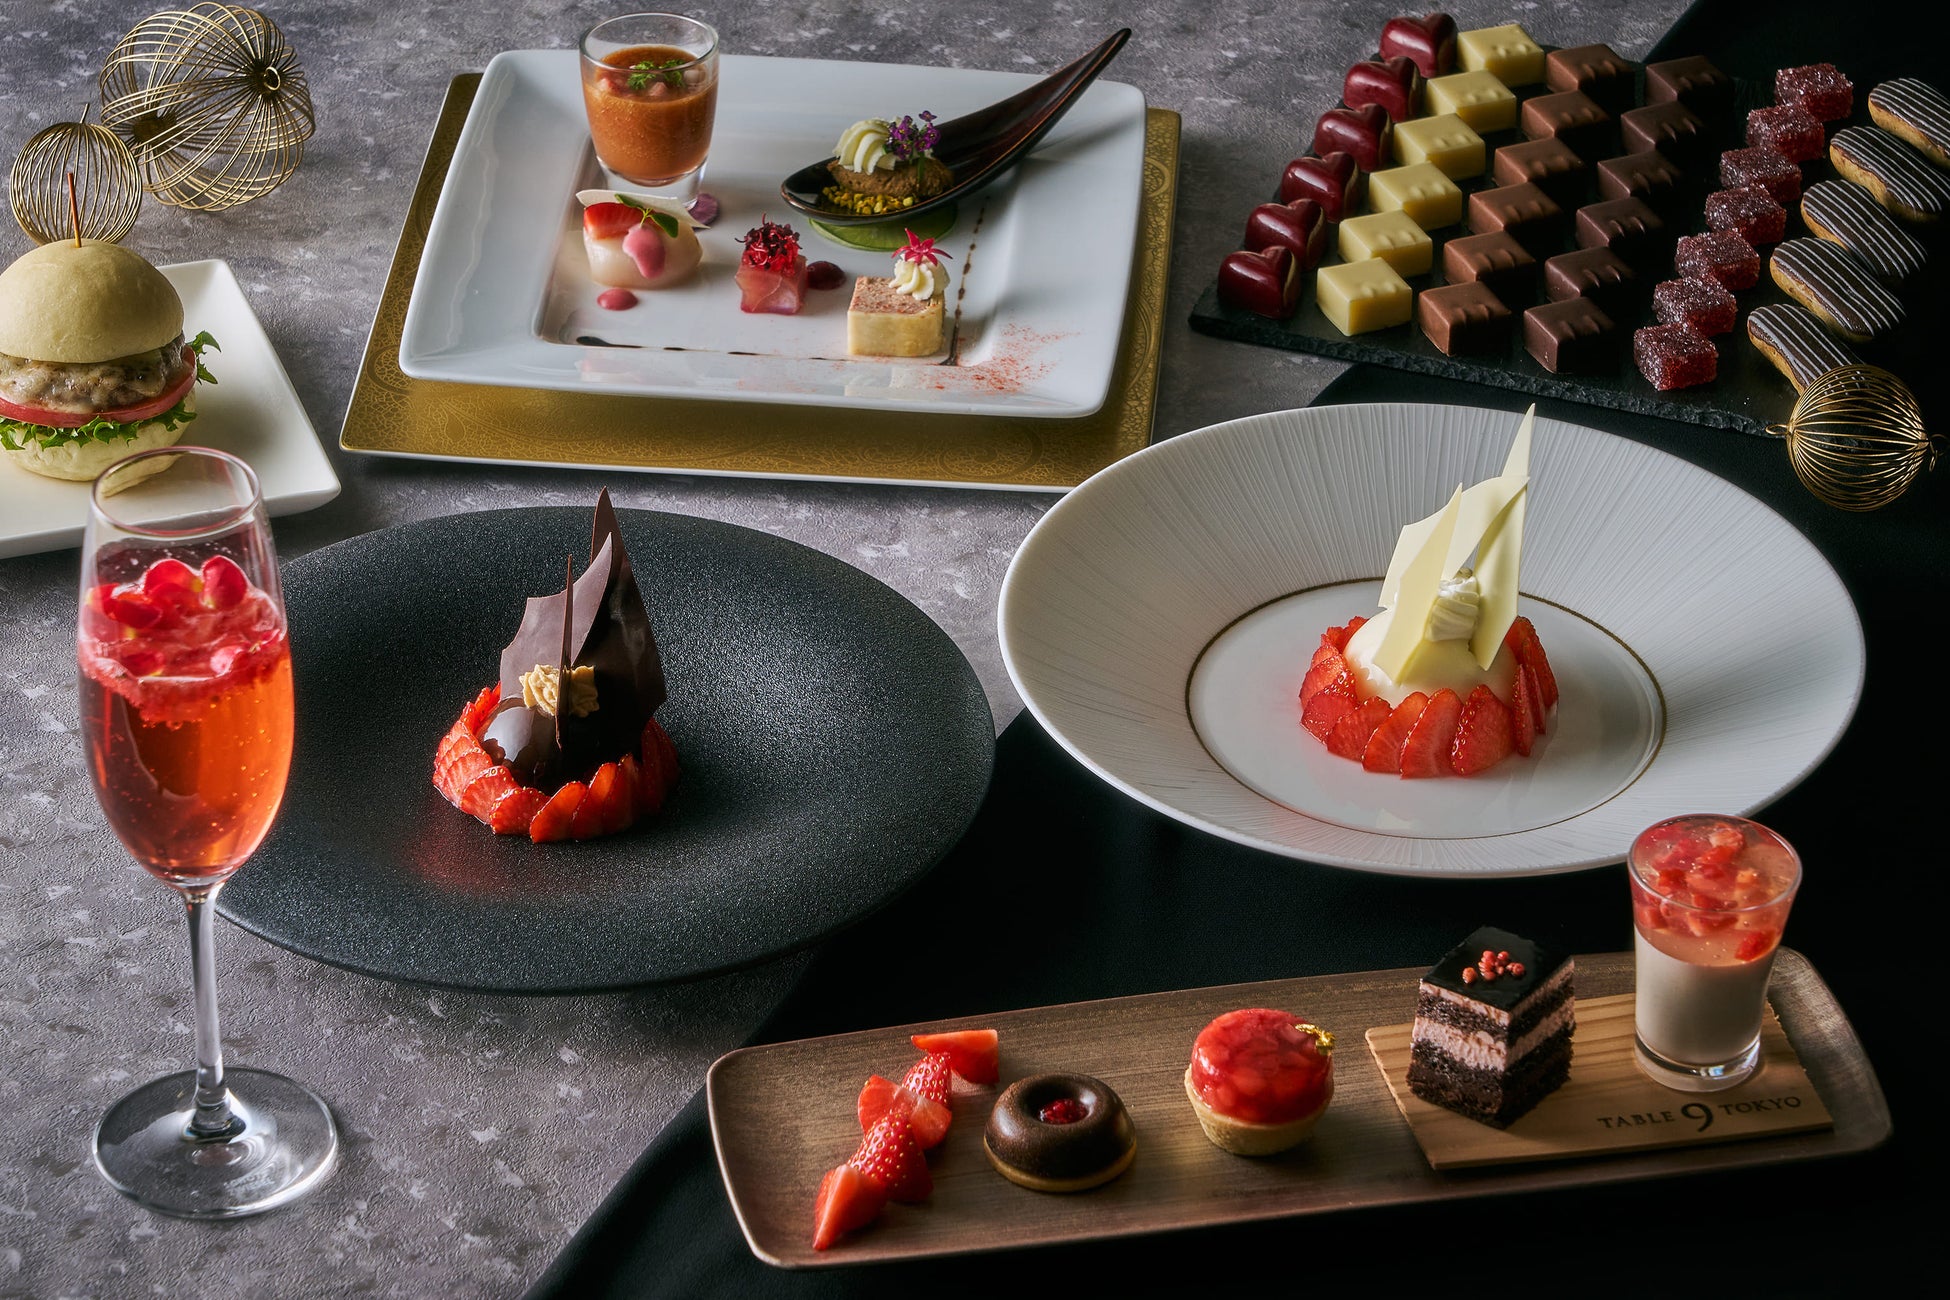 Stylish afternoon tea　～Strawberry and Chocolate～（品川プリンスホテル「DINING & BAR TABLE 9 TOKYO」）